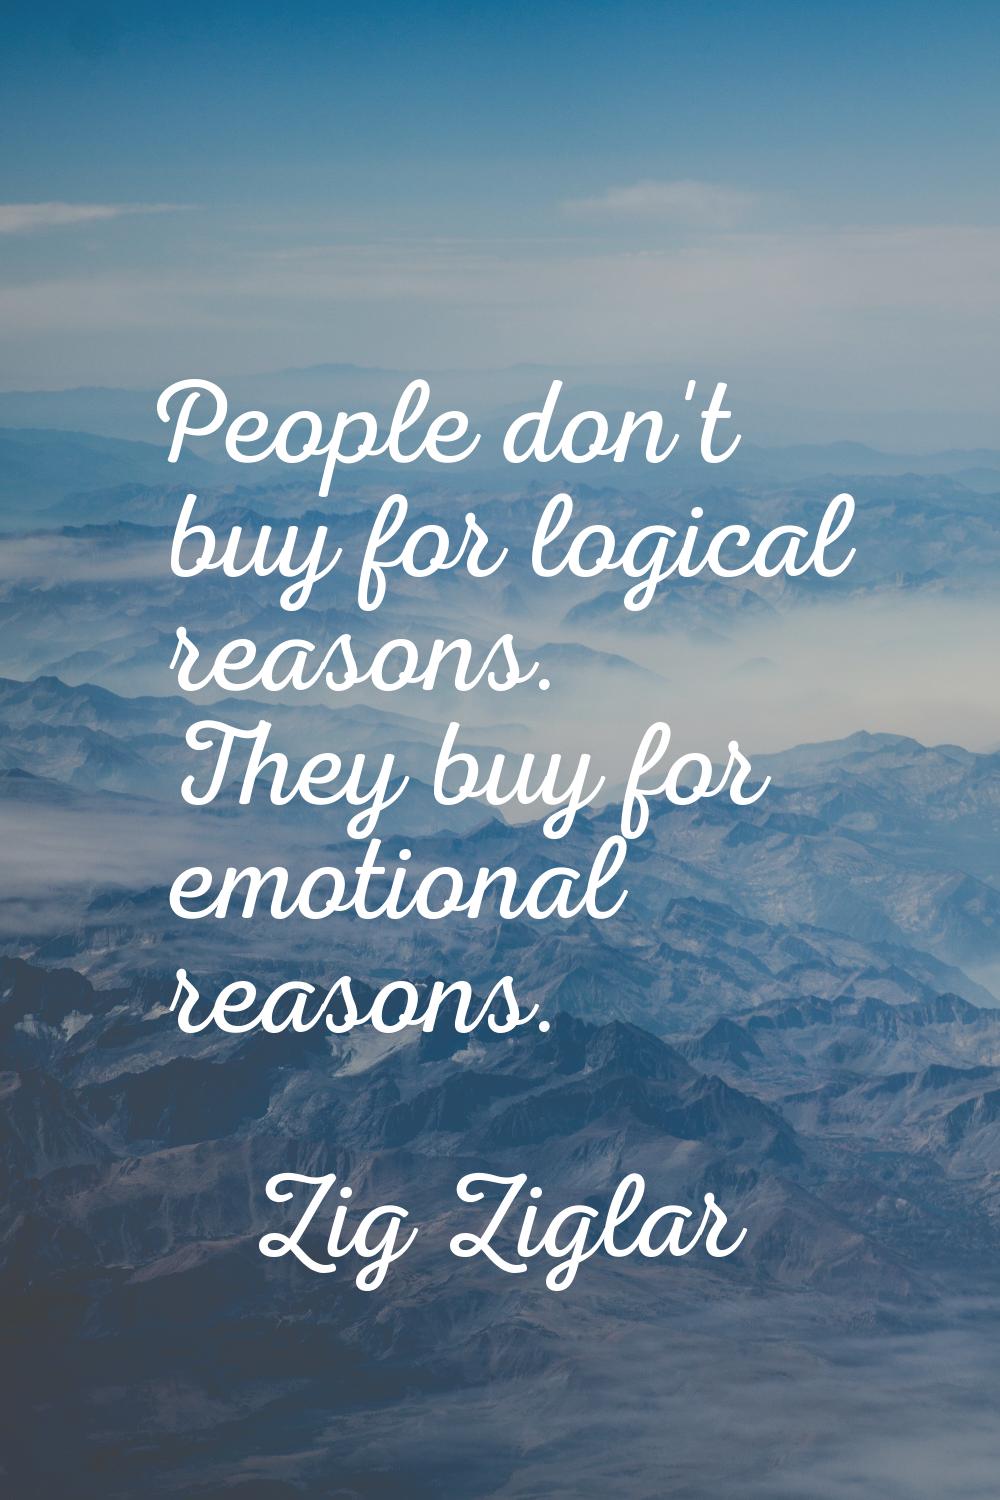 People don't buy for logical reasons. They buy for emotional reasons.